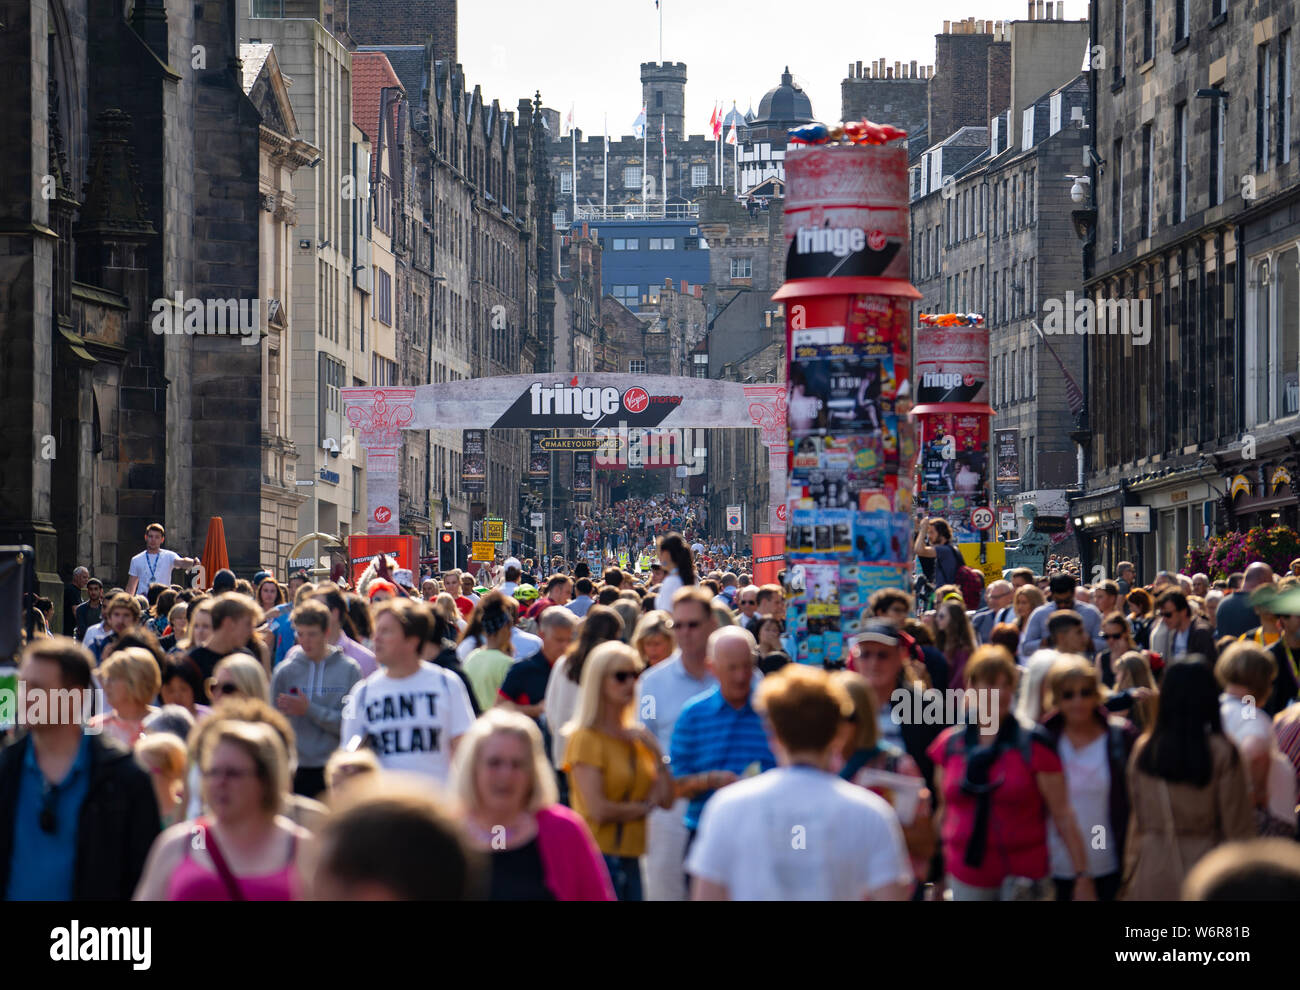 Edinburgh, Scotland, UK. 2 August 2019. On the opening day of the Edinburgh Festival Fringe the Royal Mile in Edinburgh's Old Town was thronged with people eager to enjoy the street entertainers and sunny warm weather. Iain Masterton/Alamy Live News Stock Photo